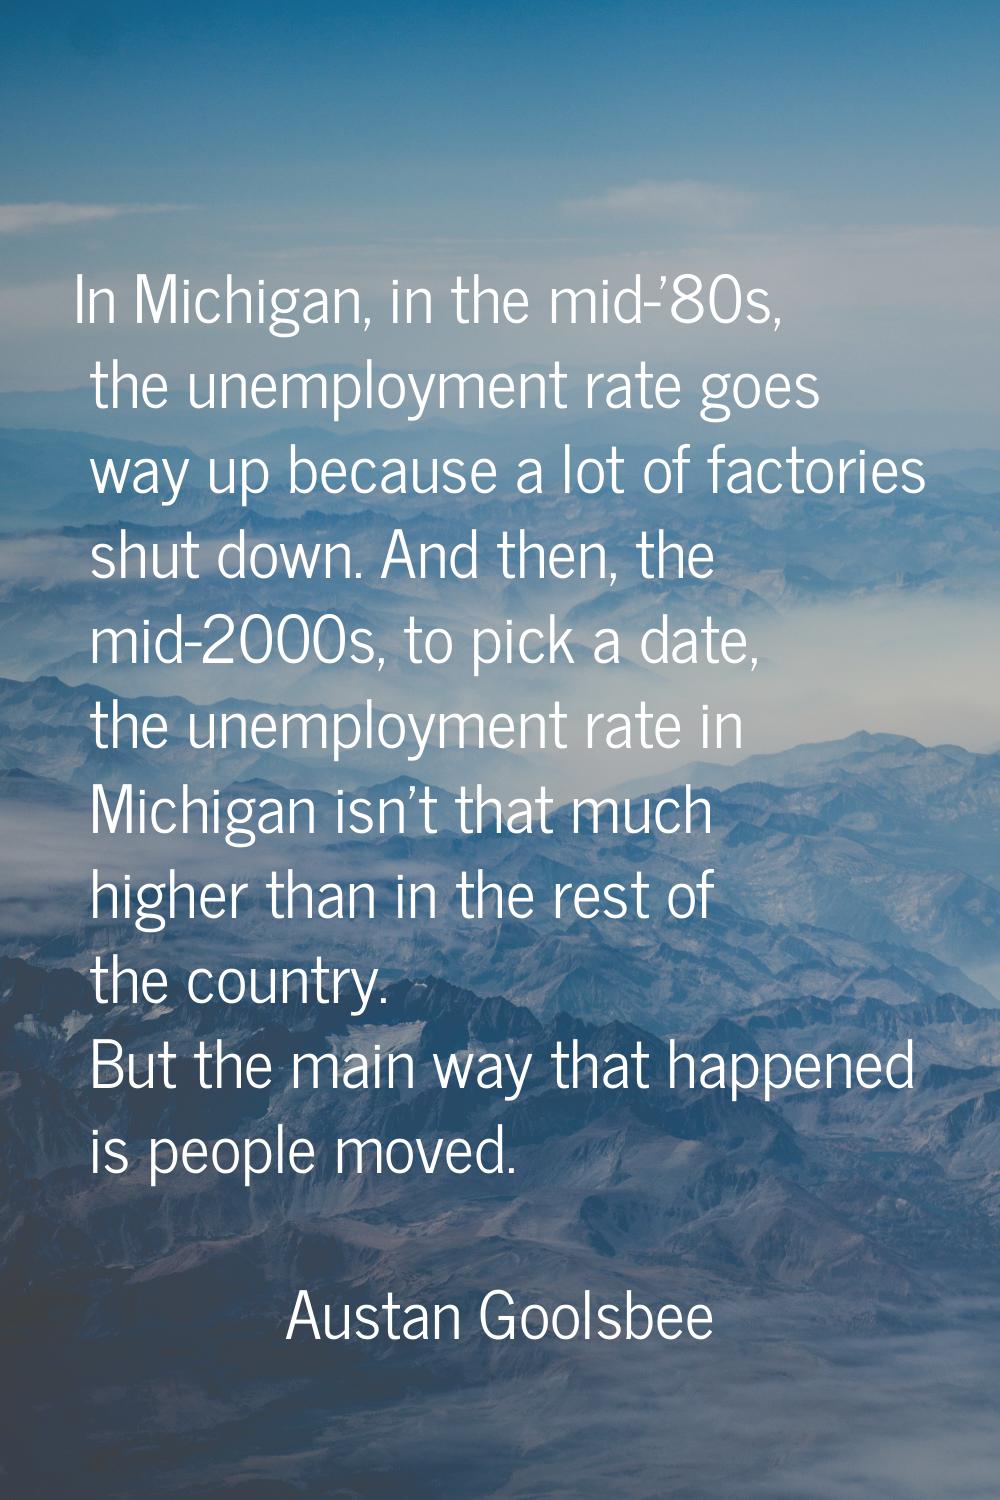 In Michigan, in the mid-'80s, the unemployment rate goes way up because a lot of factories shut dow